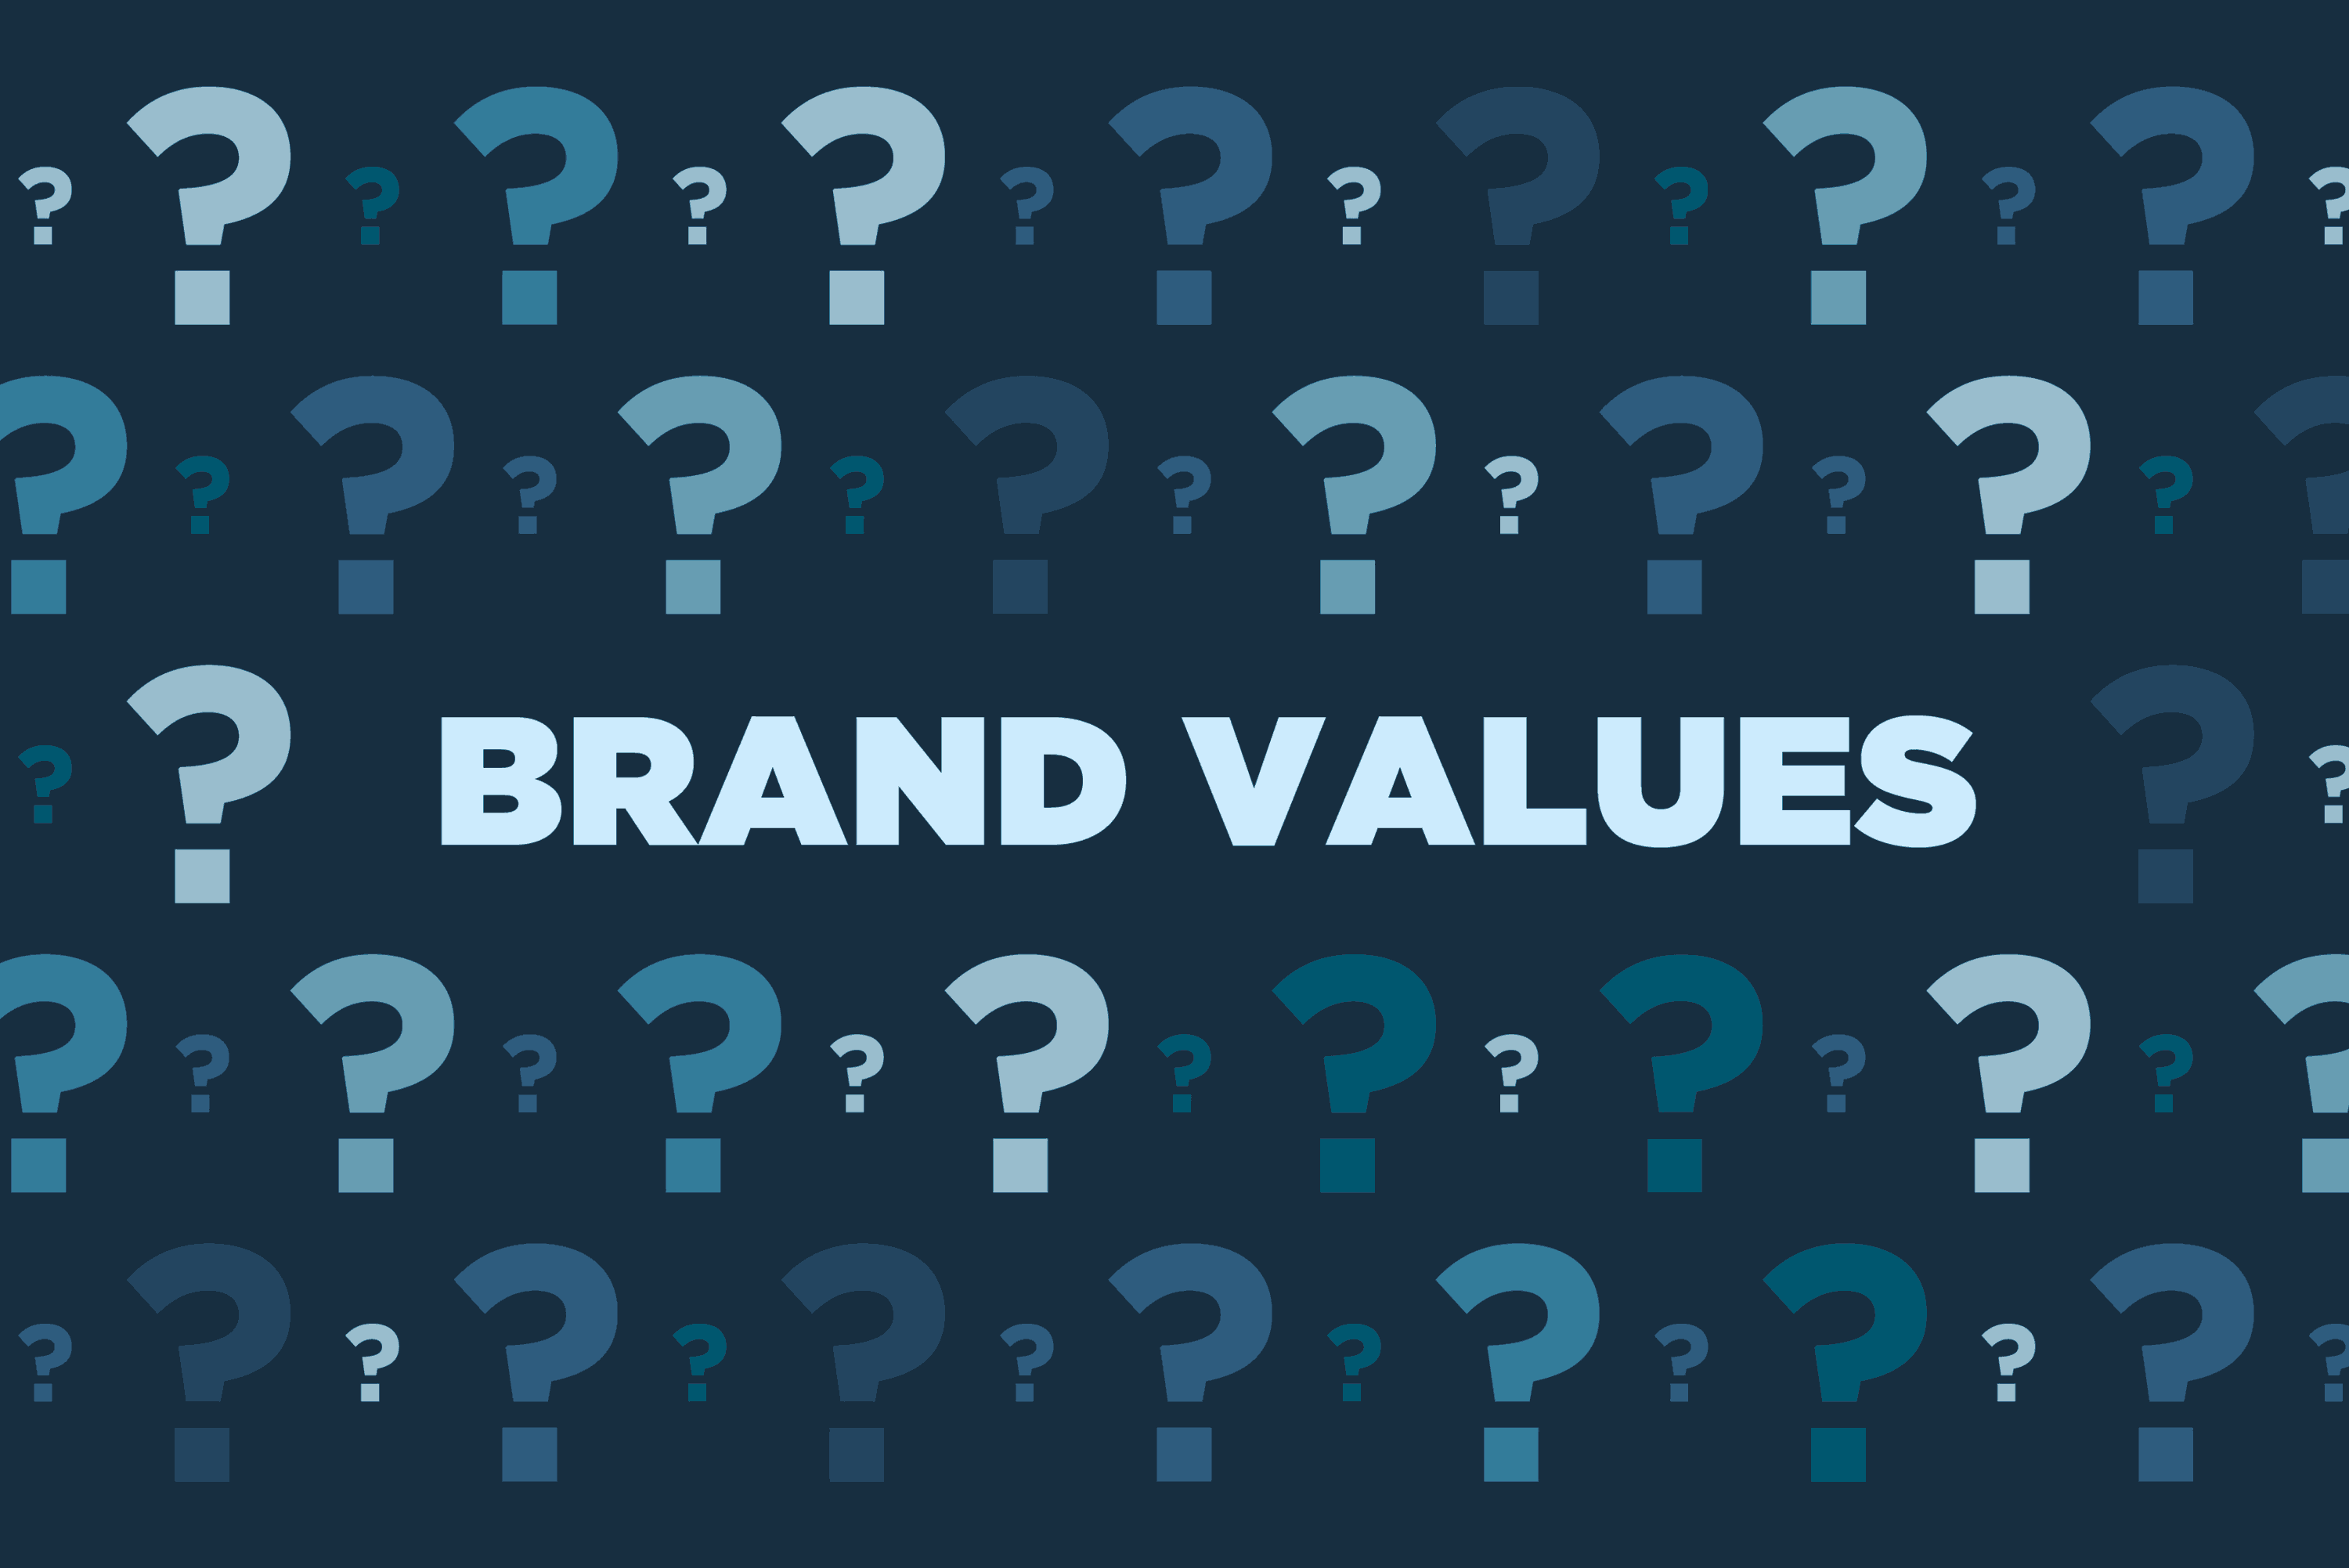 Are your brand values really working for you?